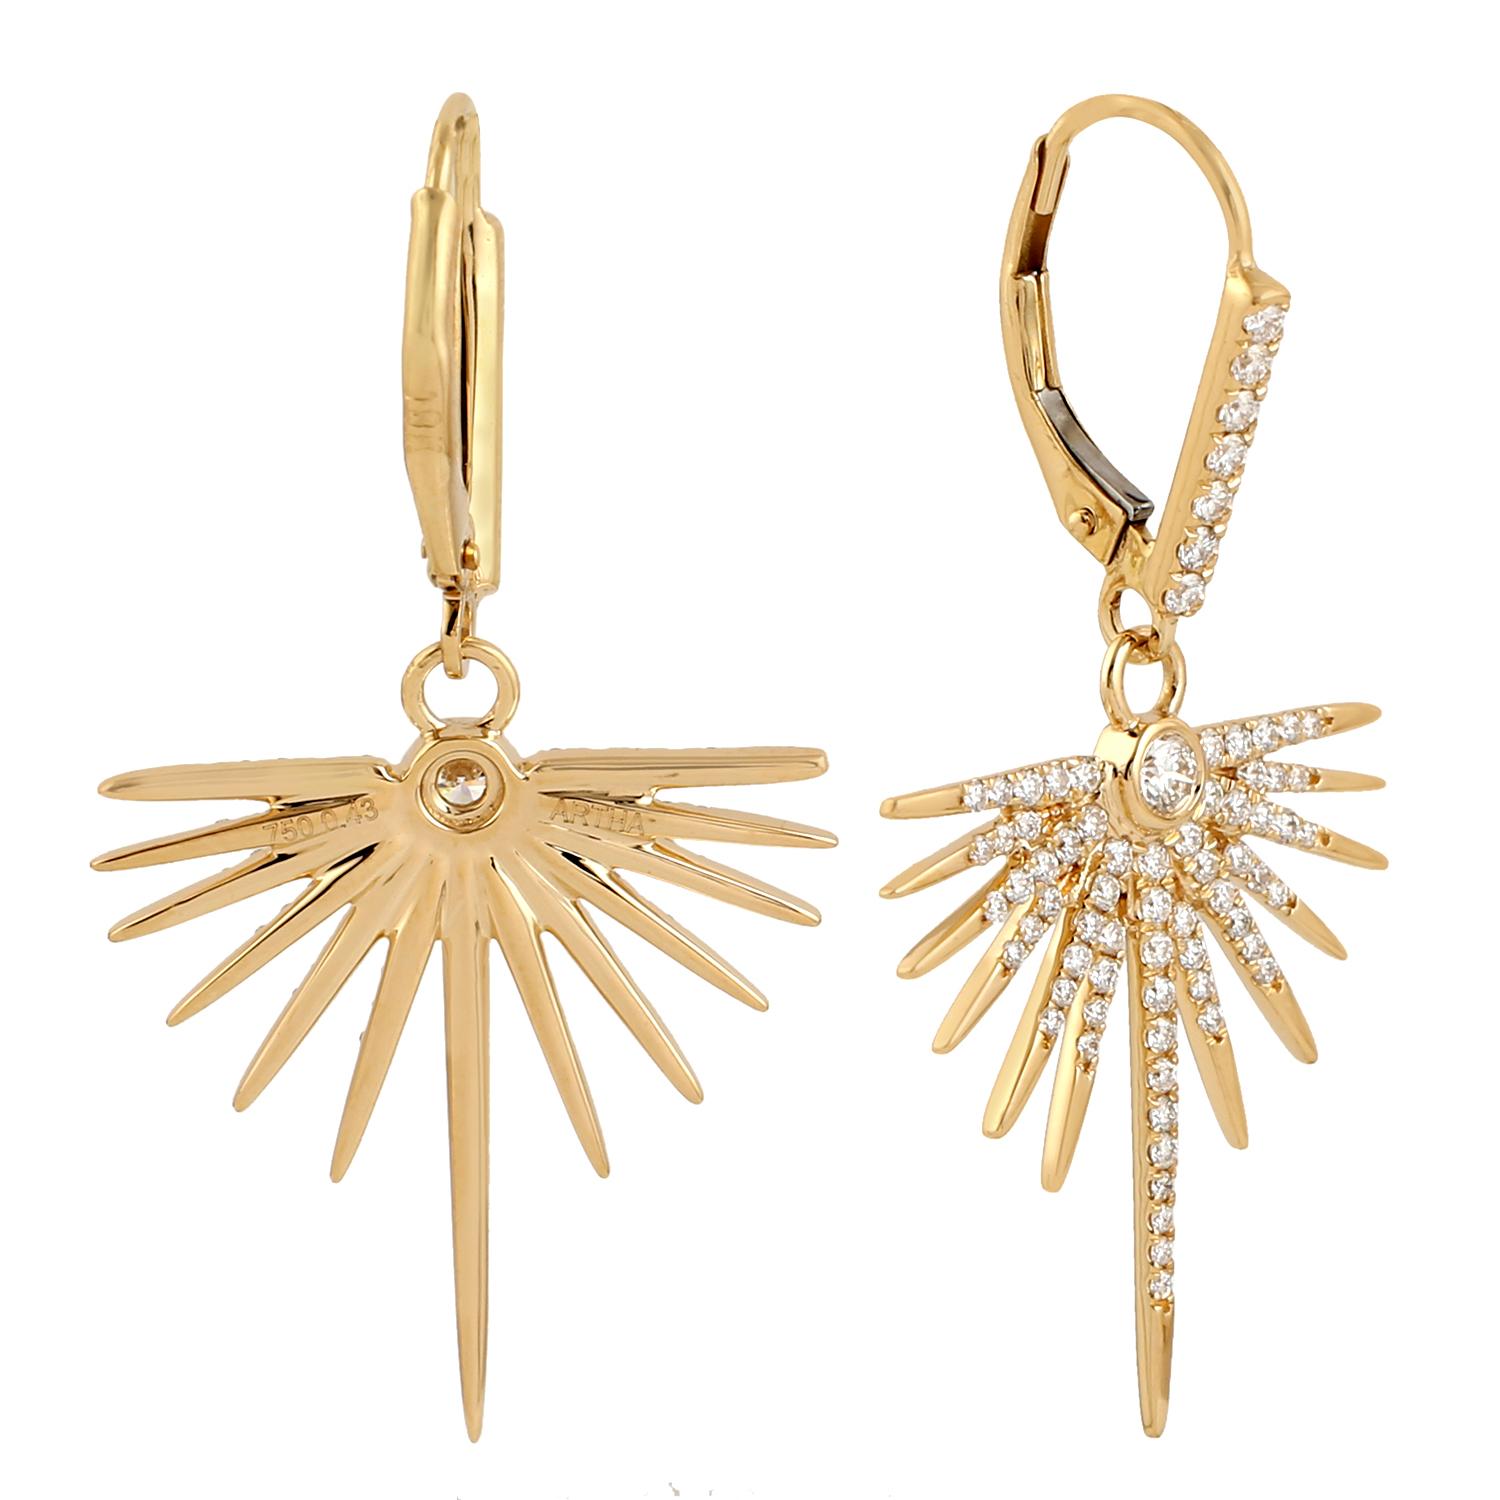 Artisan Sunburst Earrings With Diamonds Made In 18k Yellow Gold For Sale